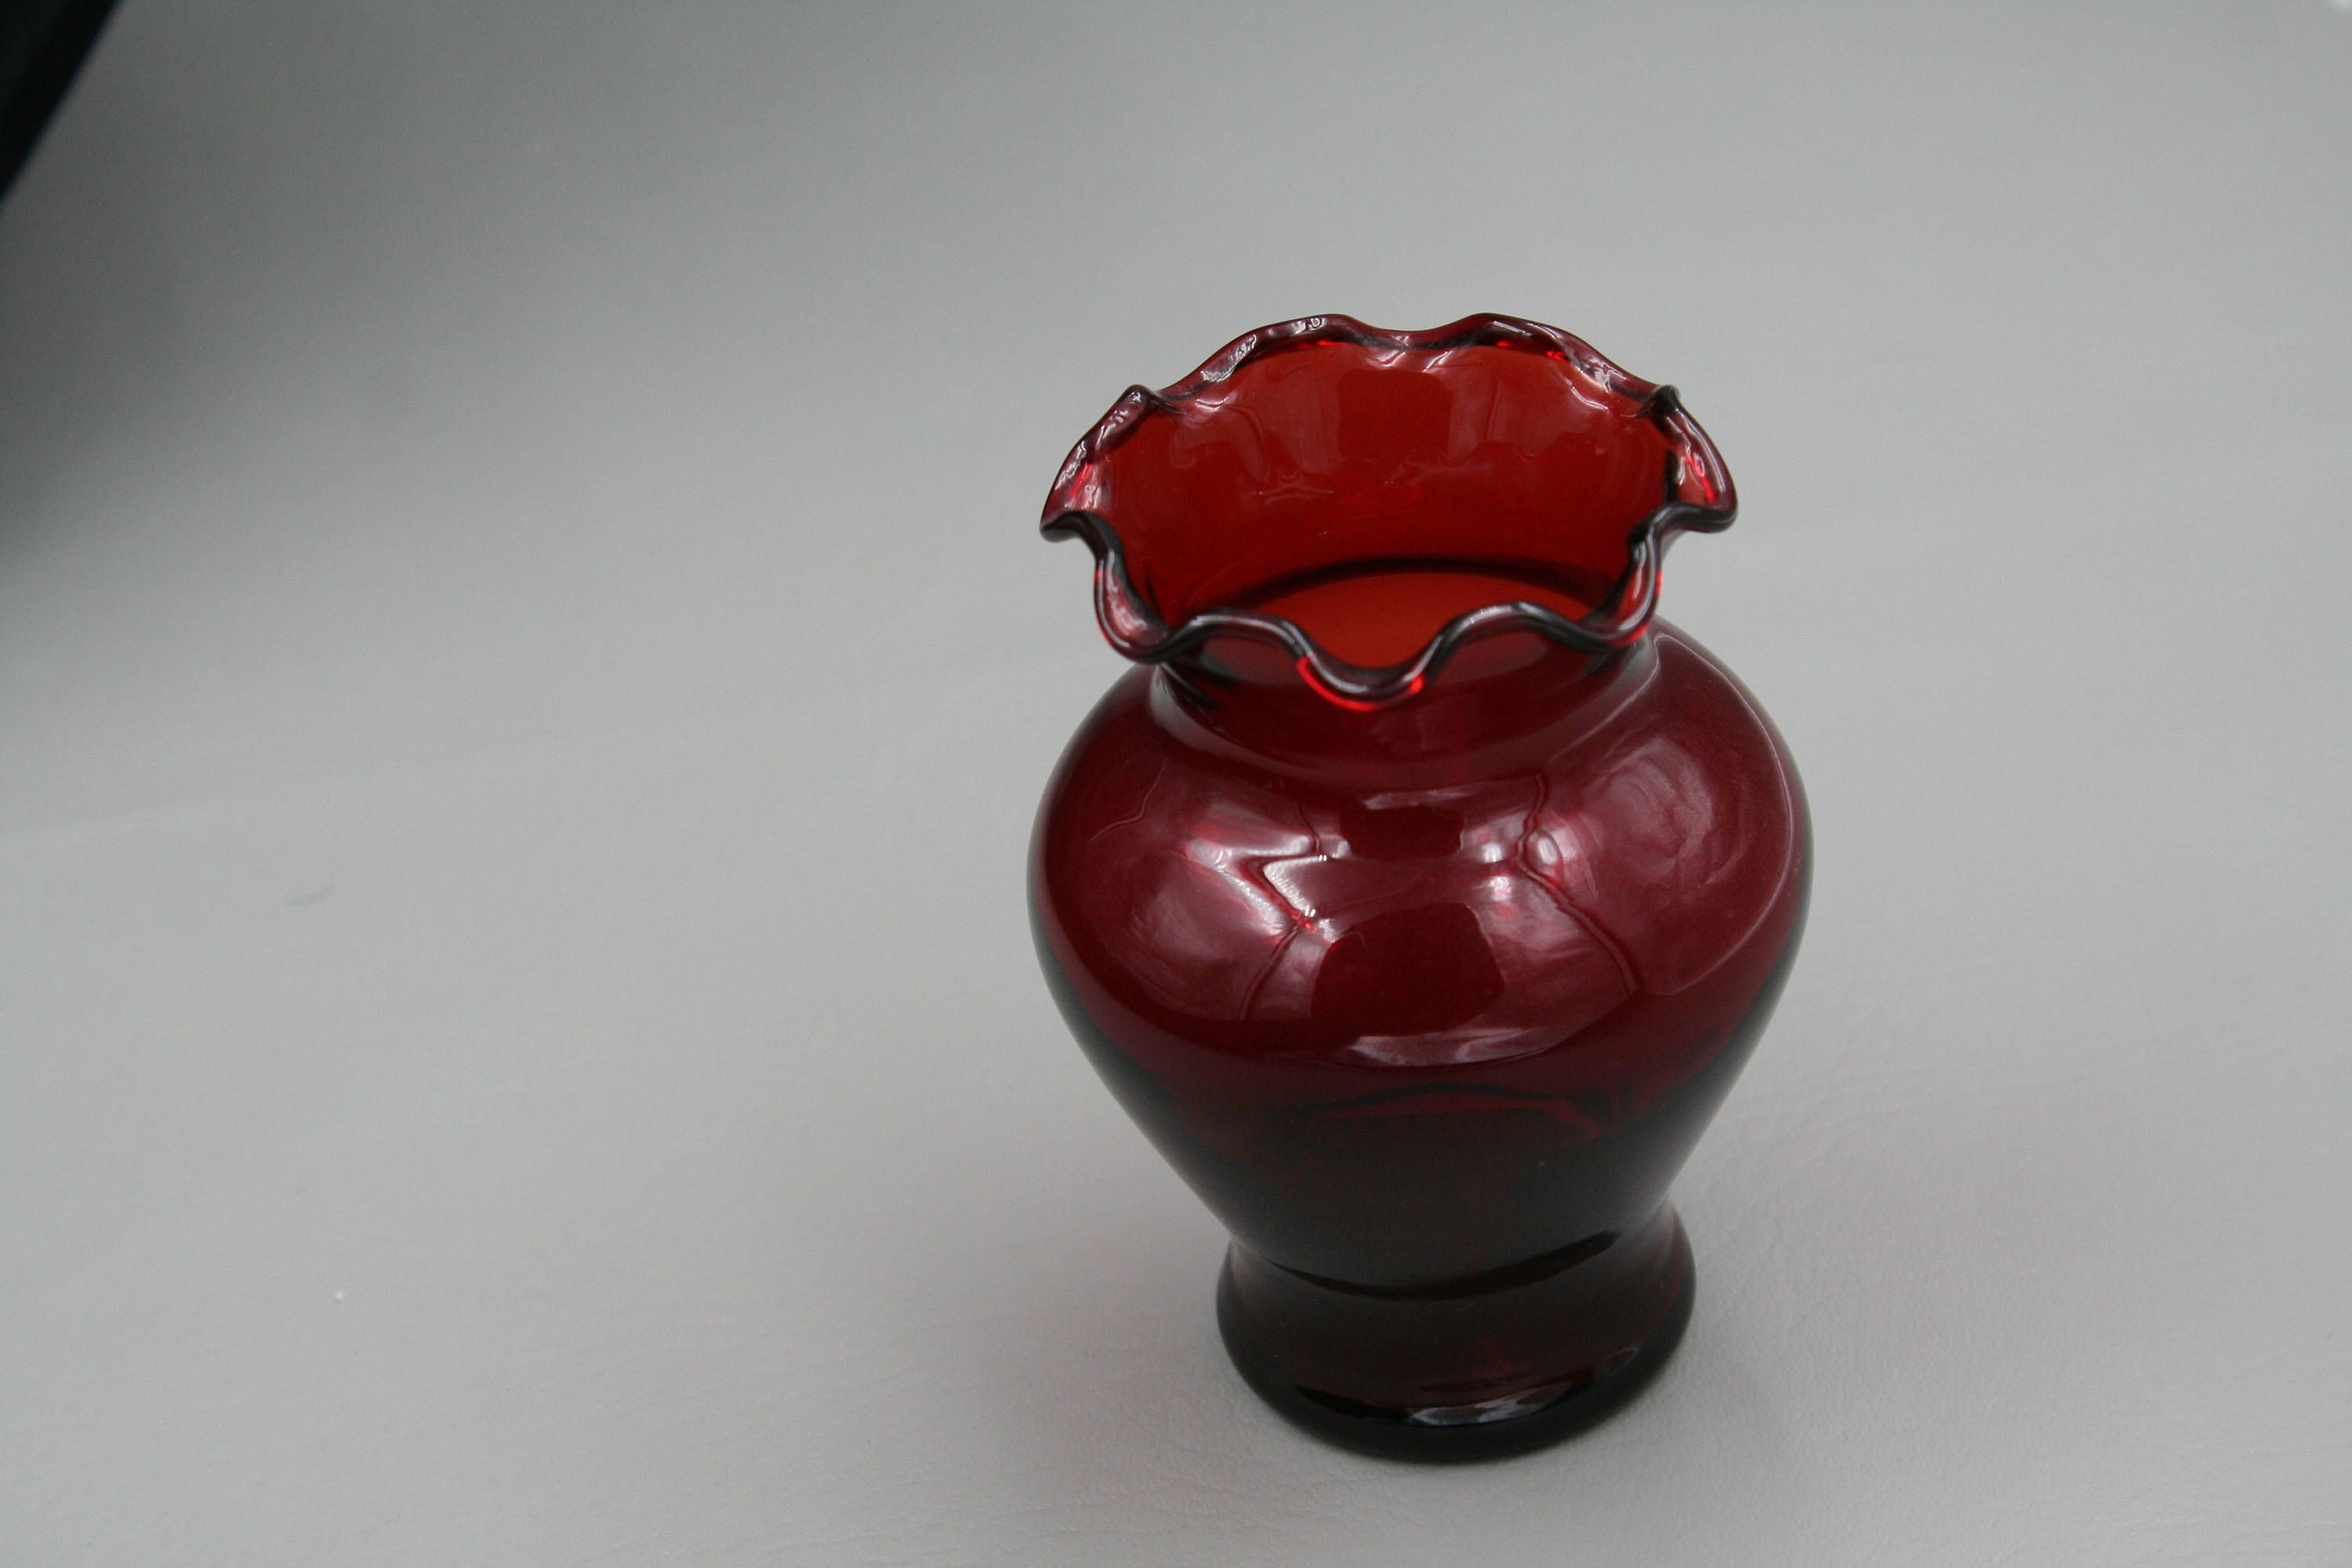 19 Trendy Red Cut Glass Vase 2024 free download red cut glass vase of 21 glass vase with lid the weekly world with regard to cranberry red glass vase